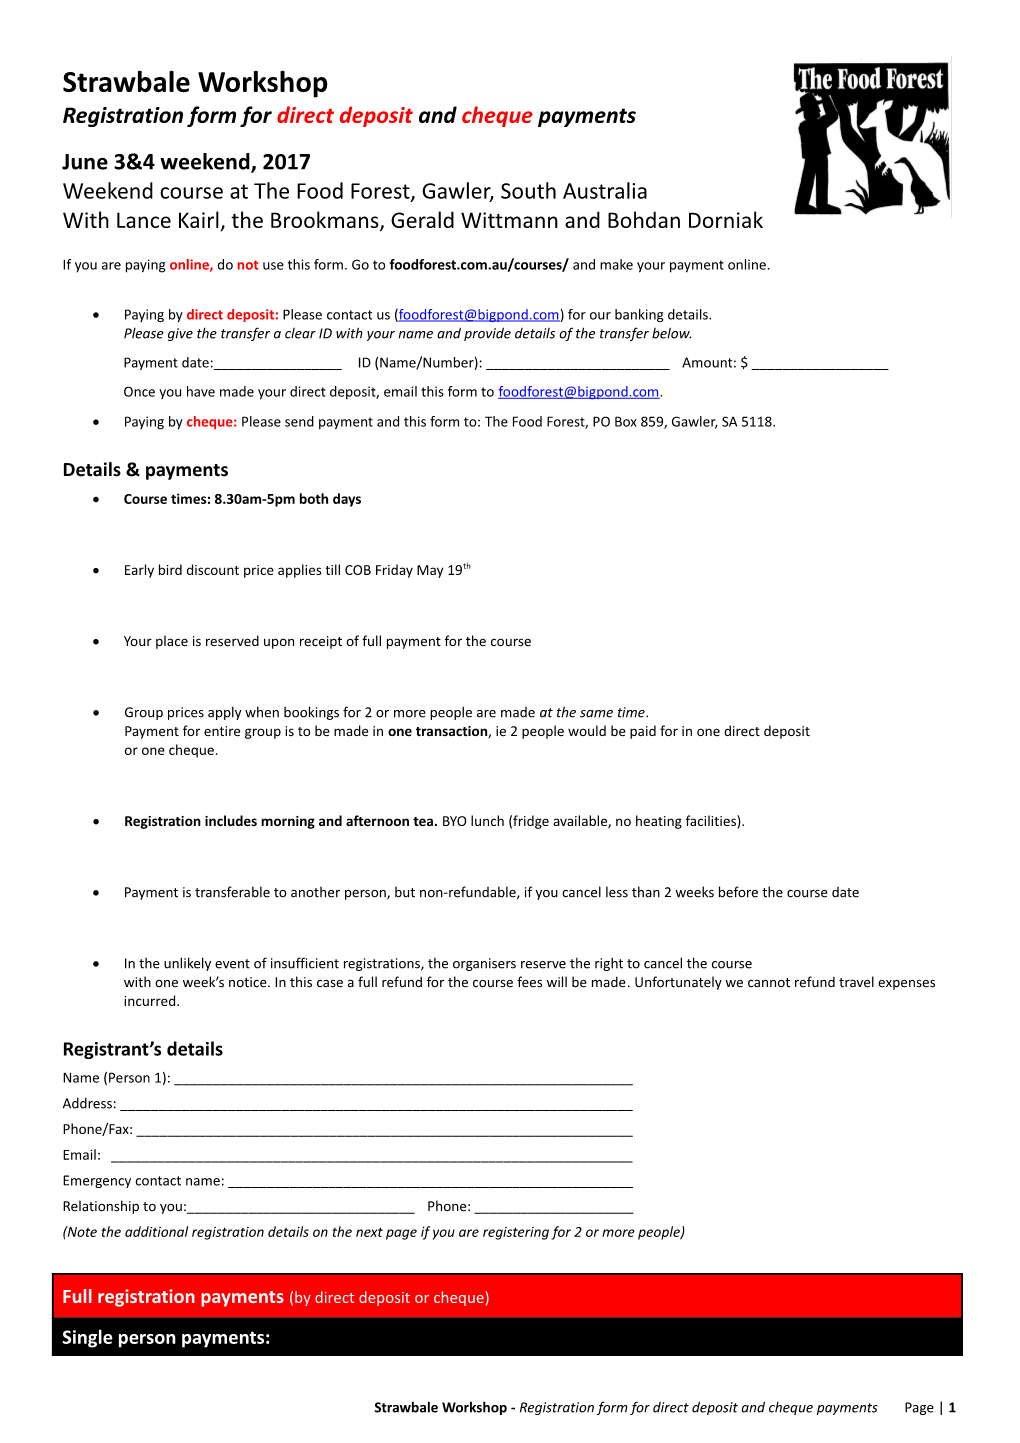 Strawbale Workshop Registration Form for Direct Deposit and Cheque Payments